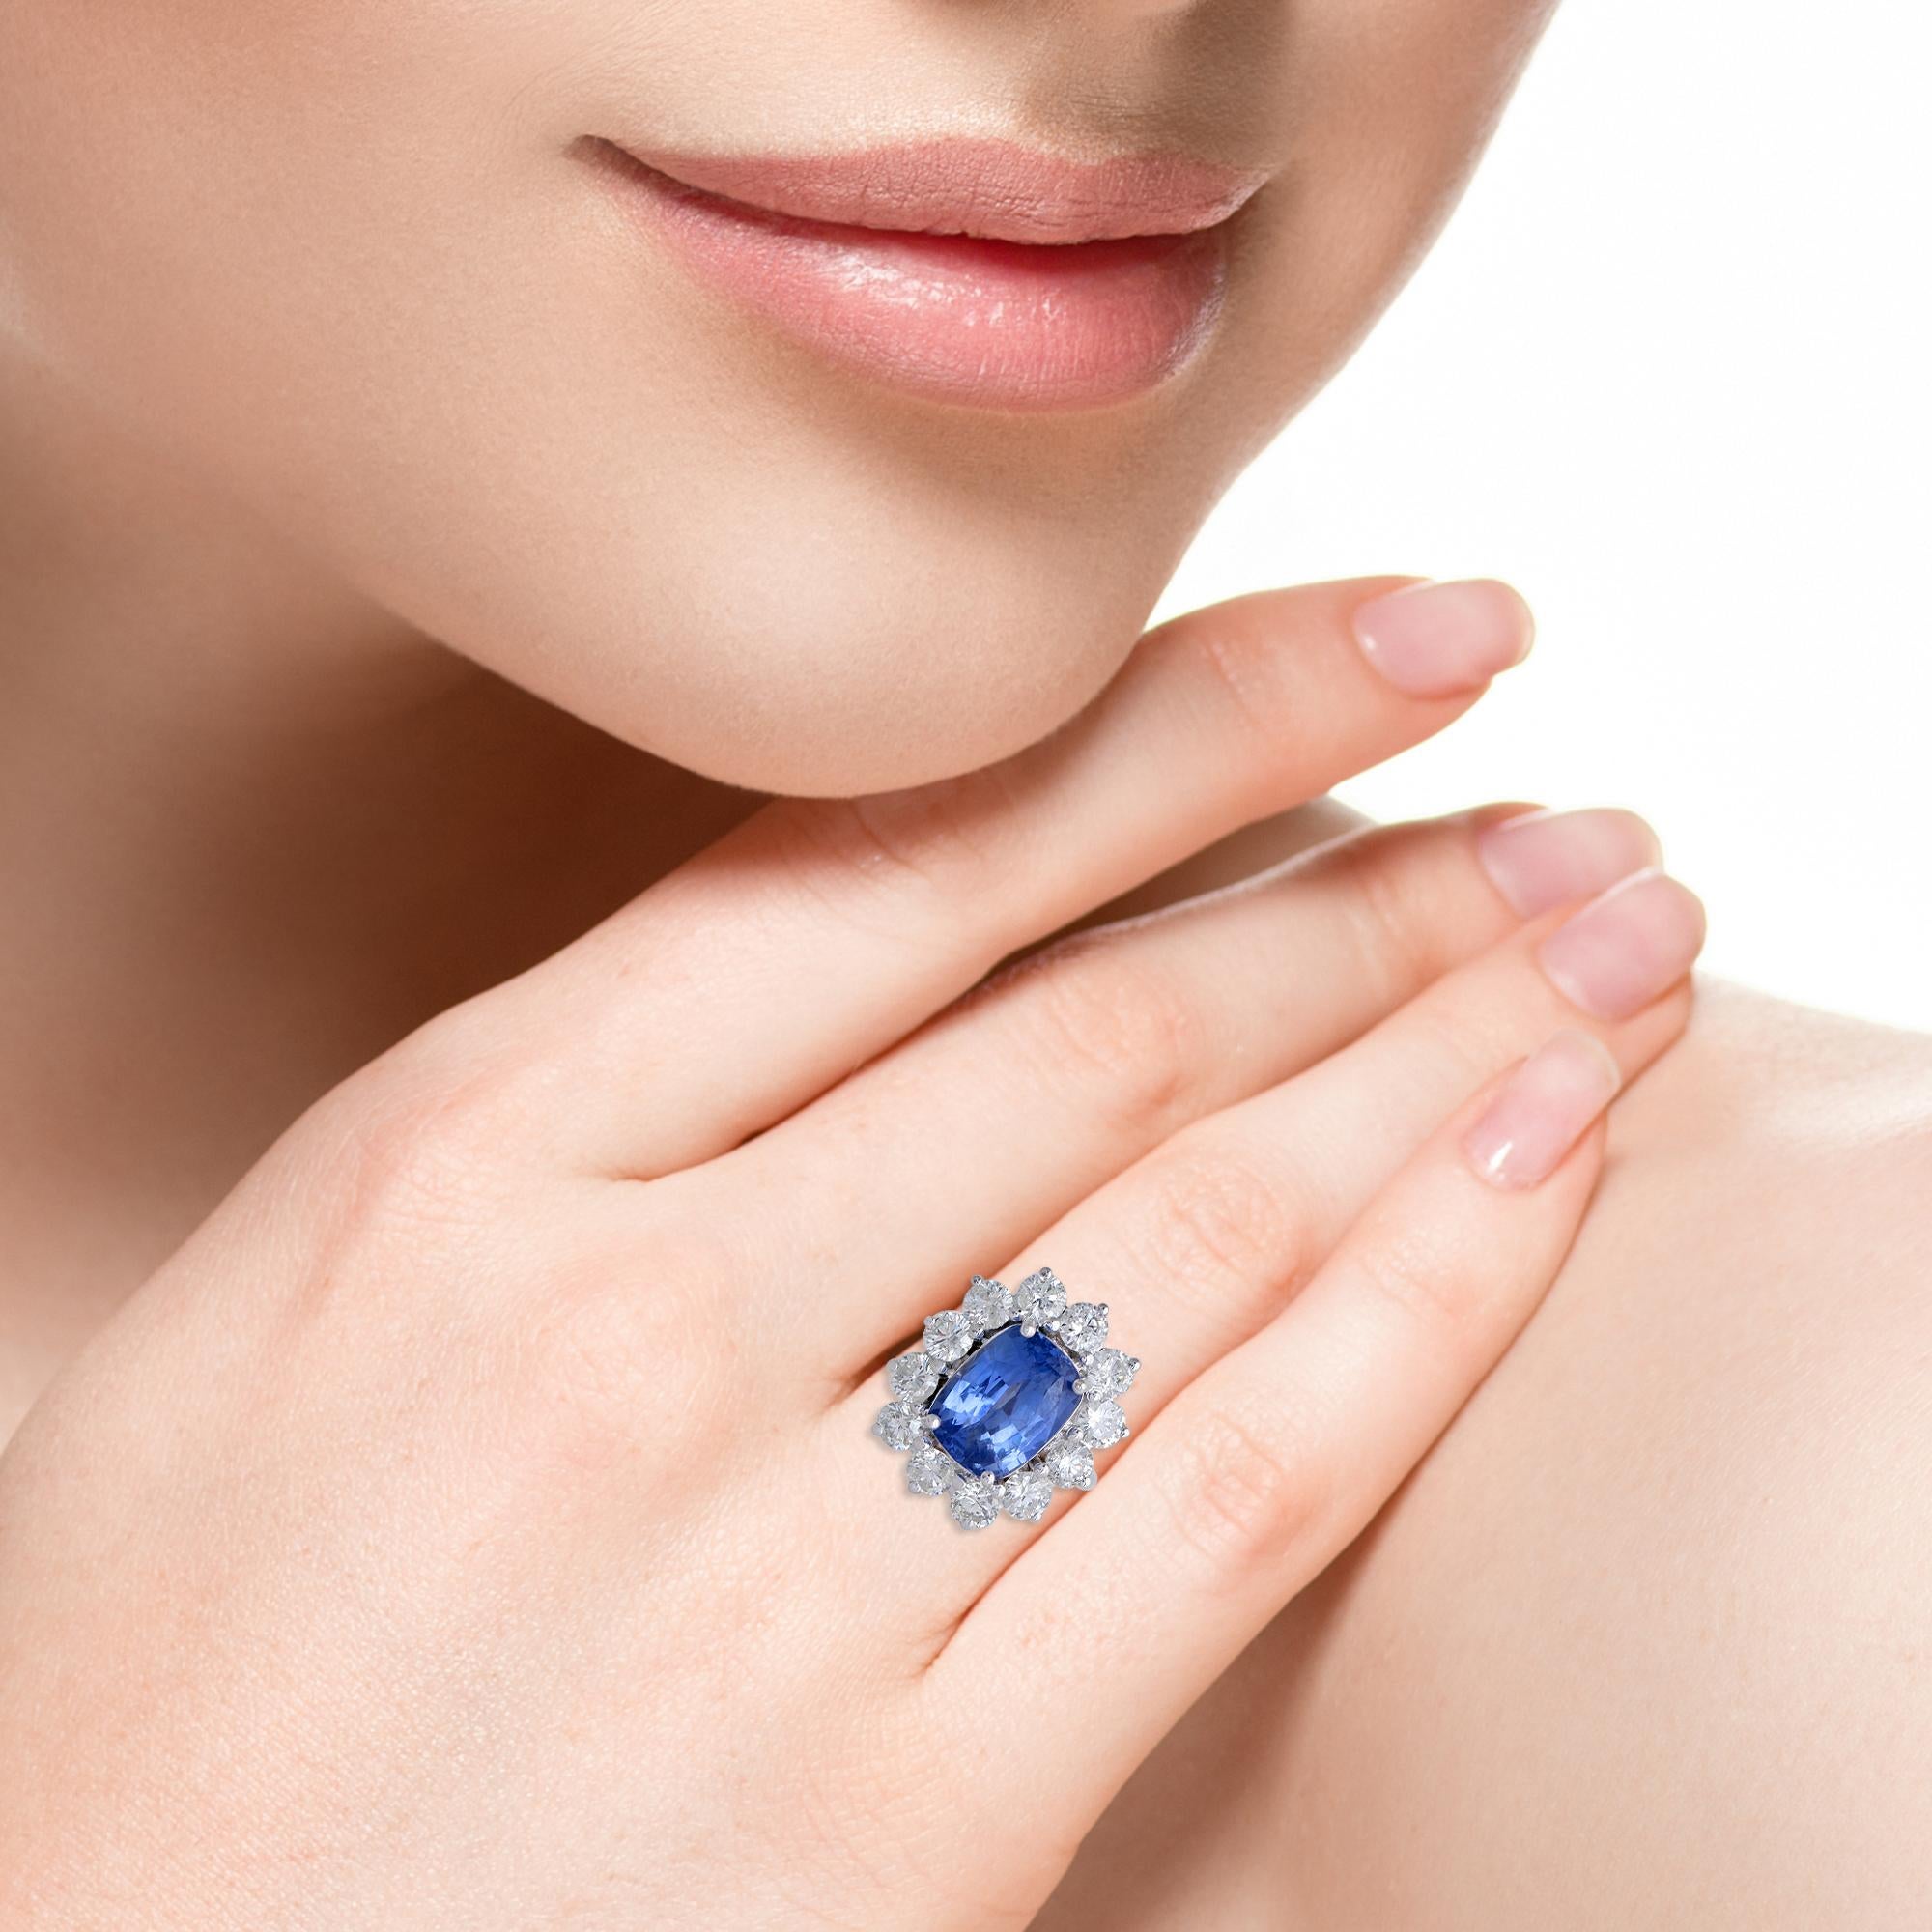 For Sale:  Blue Sapphire Gemstone Cocktail Ring Diamond 18 Kt White Gold Handmade Jewelry 5